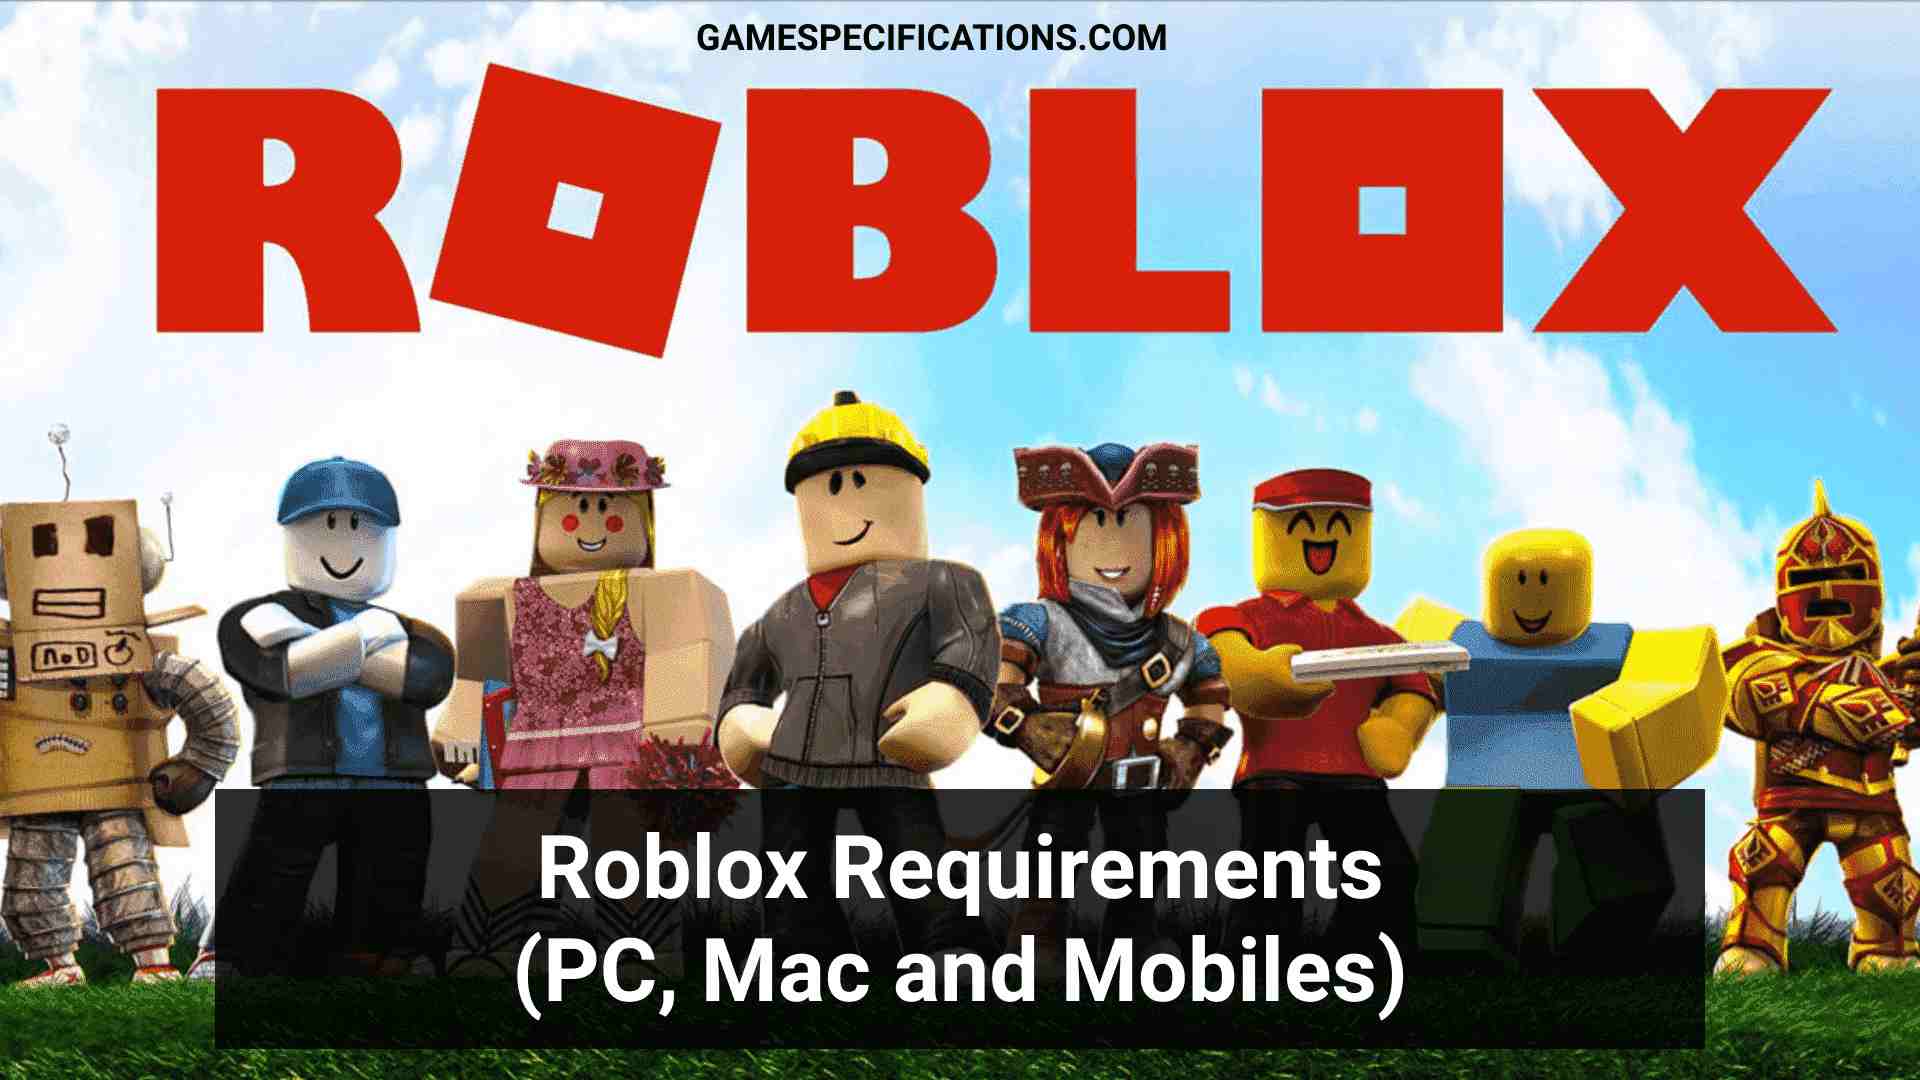 Roblox Requirements For Windows Pc Mac Android Ios Xbox And Ps4 Game Specifications - what computer requirements for roblox